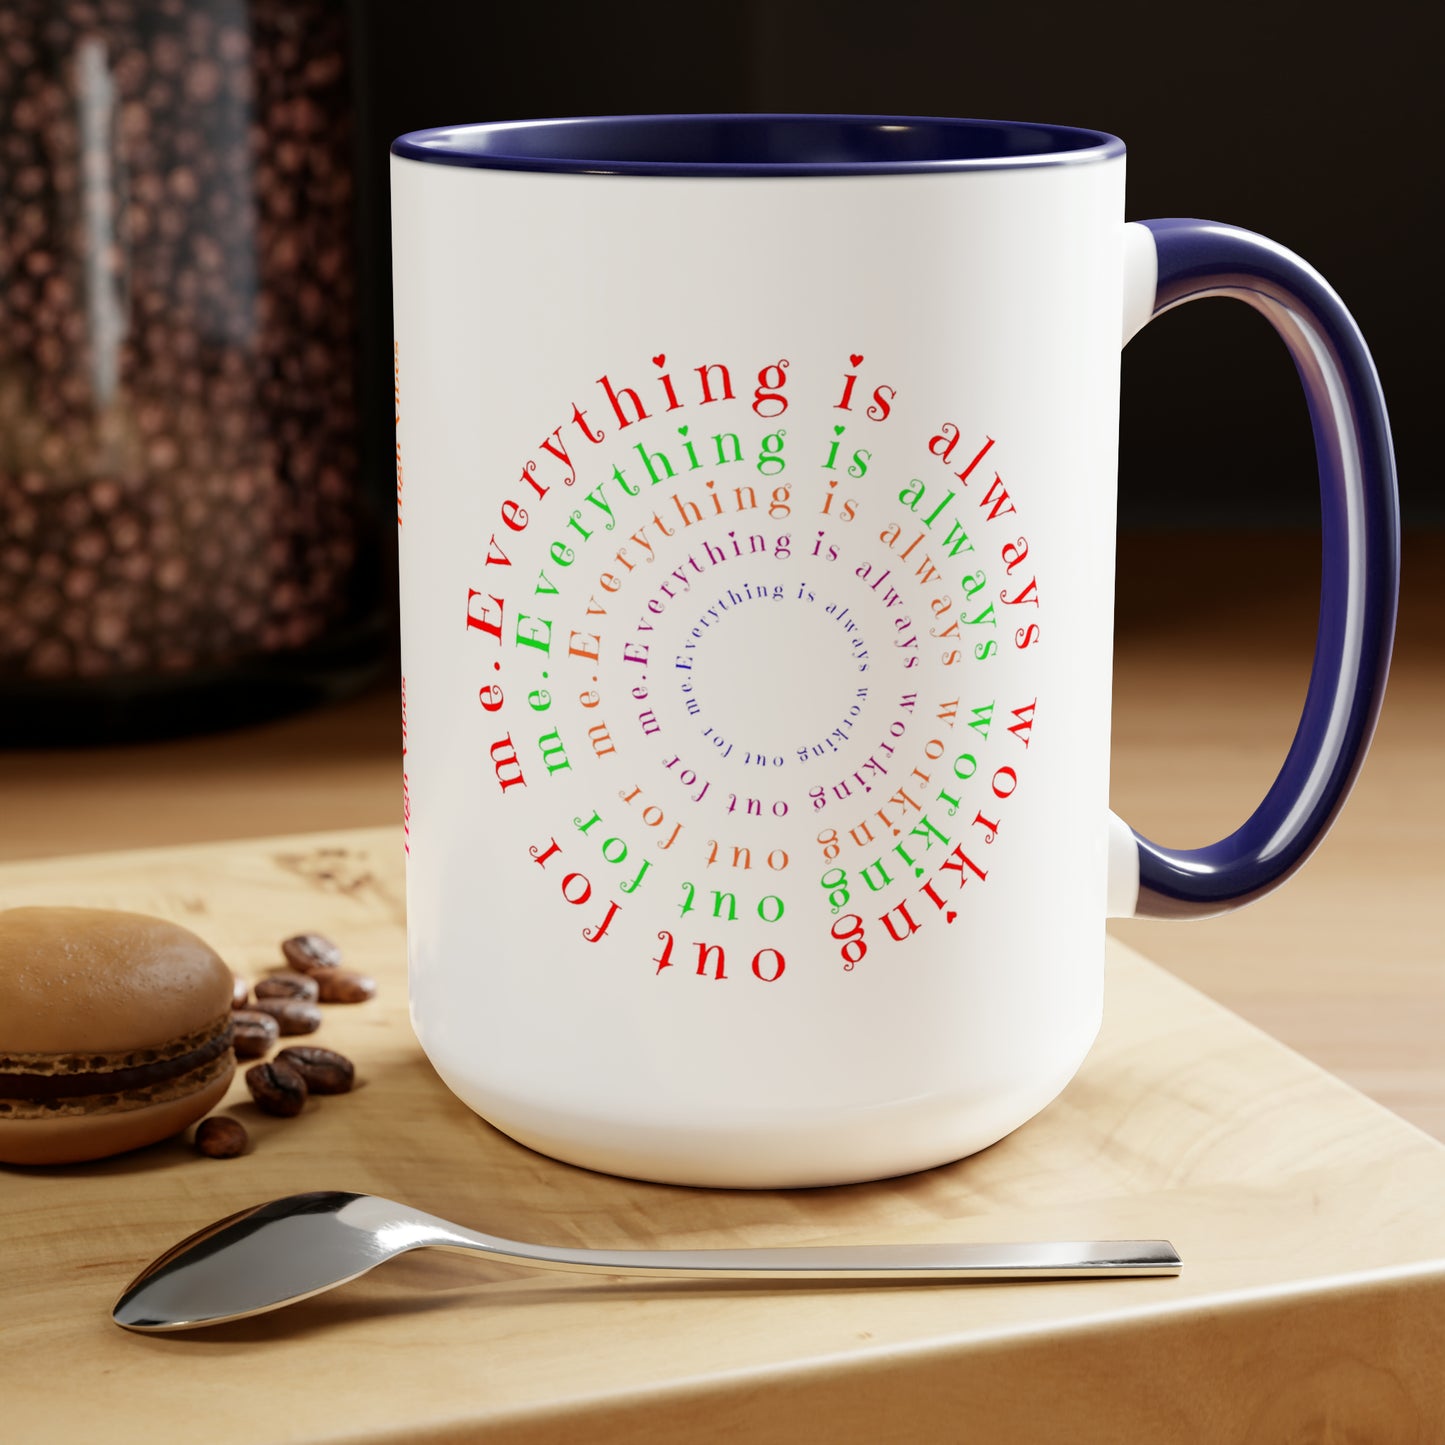 Everything Is Always Working Out For Me - Abraham Hicks Quote Two-Tone Coffee Mugs, 15oz